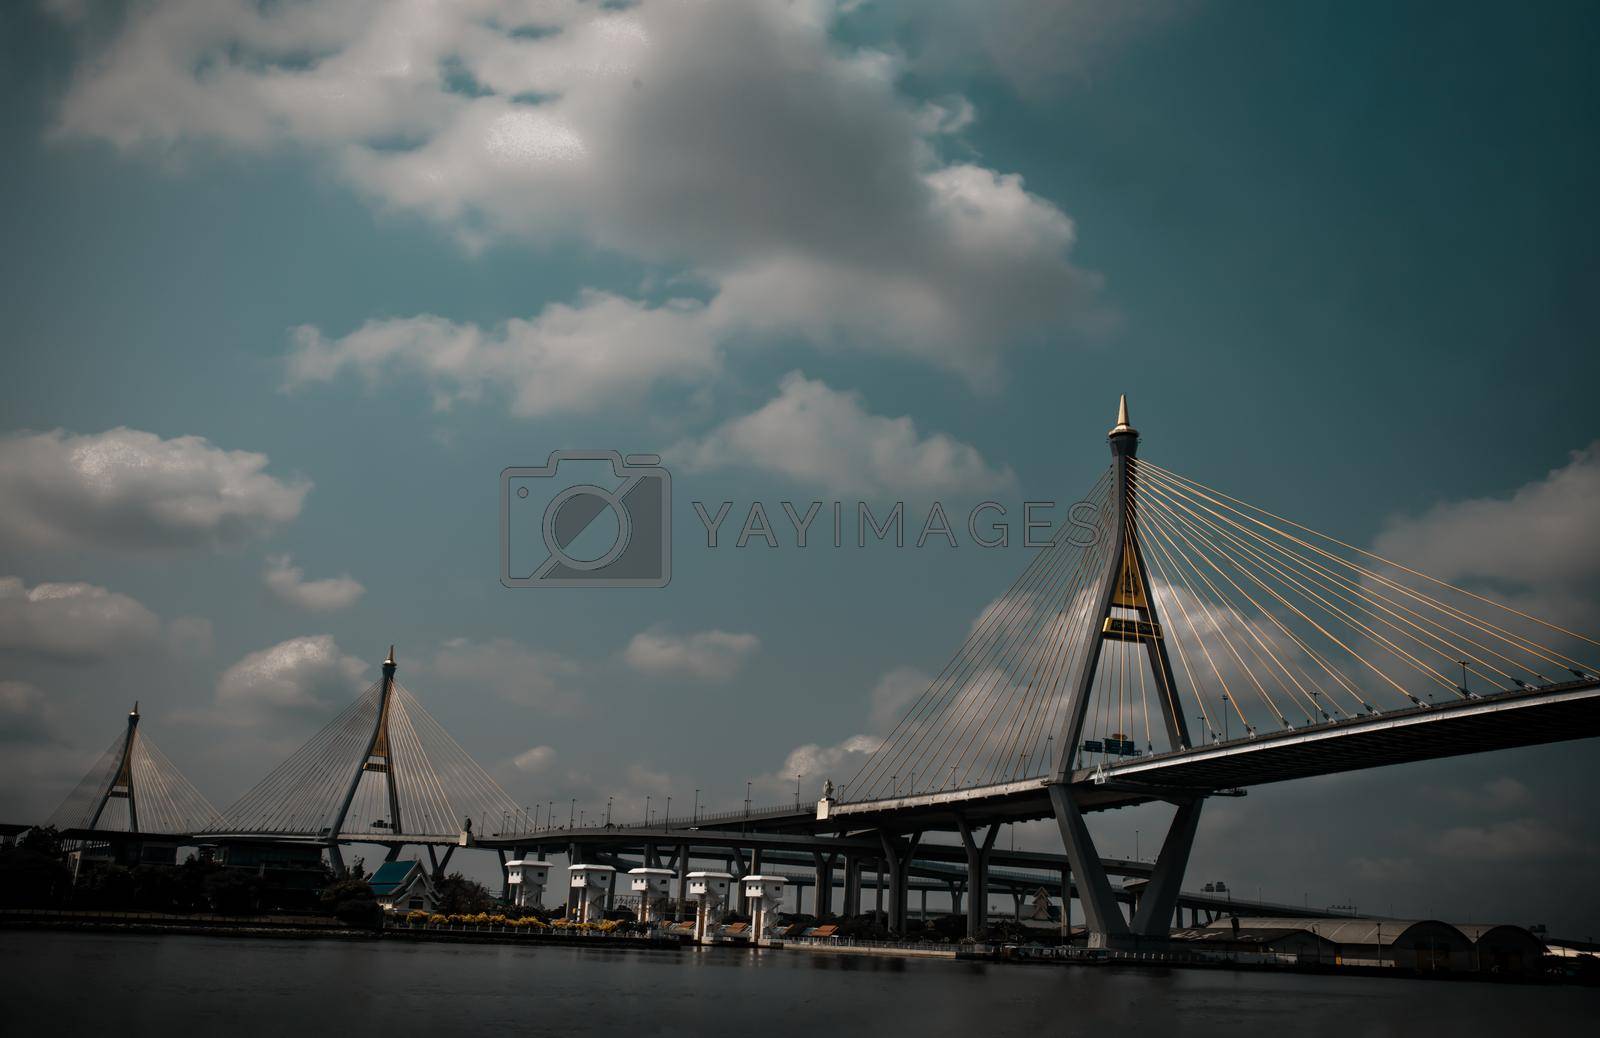 Bangkok, thailand - 12 Mar, 2021 : Bhumibol suspension bridge cross over Chao Phraya River at afternoon. Is one of the most beautiful bridges in Thailand. No focus, specifically.